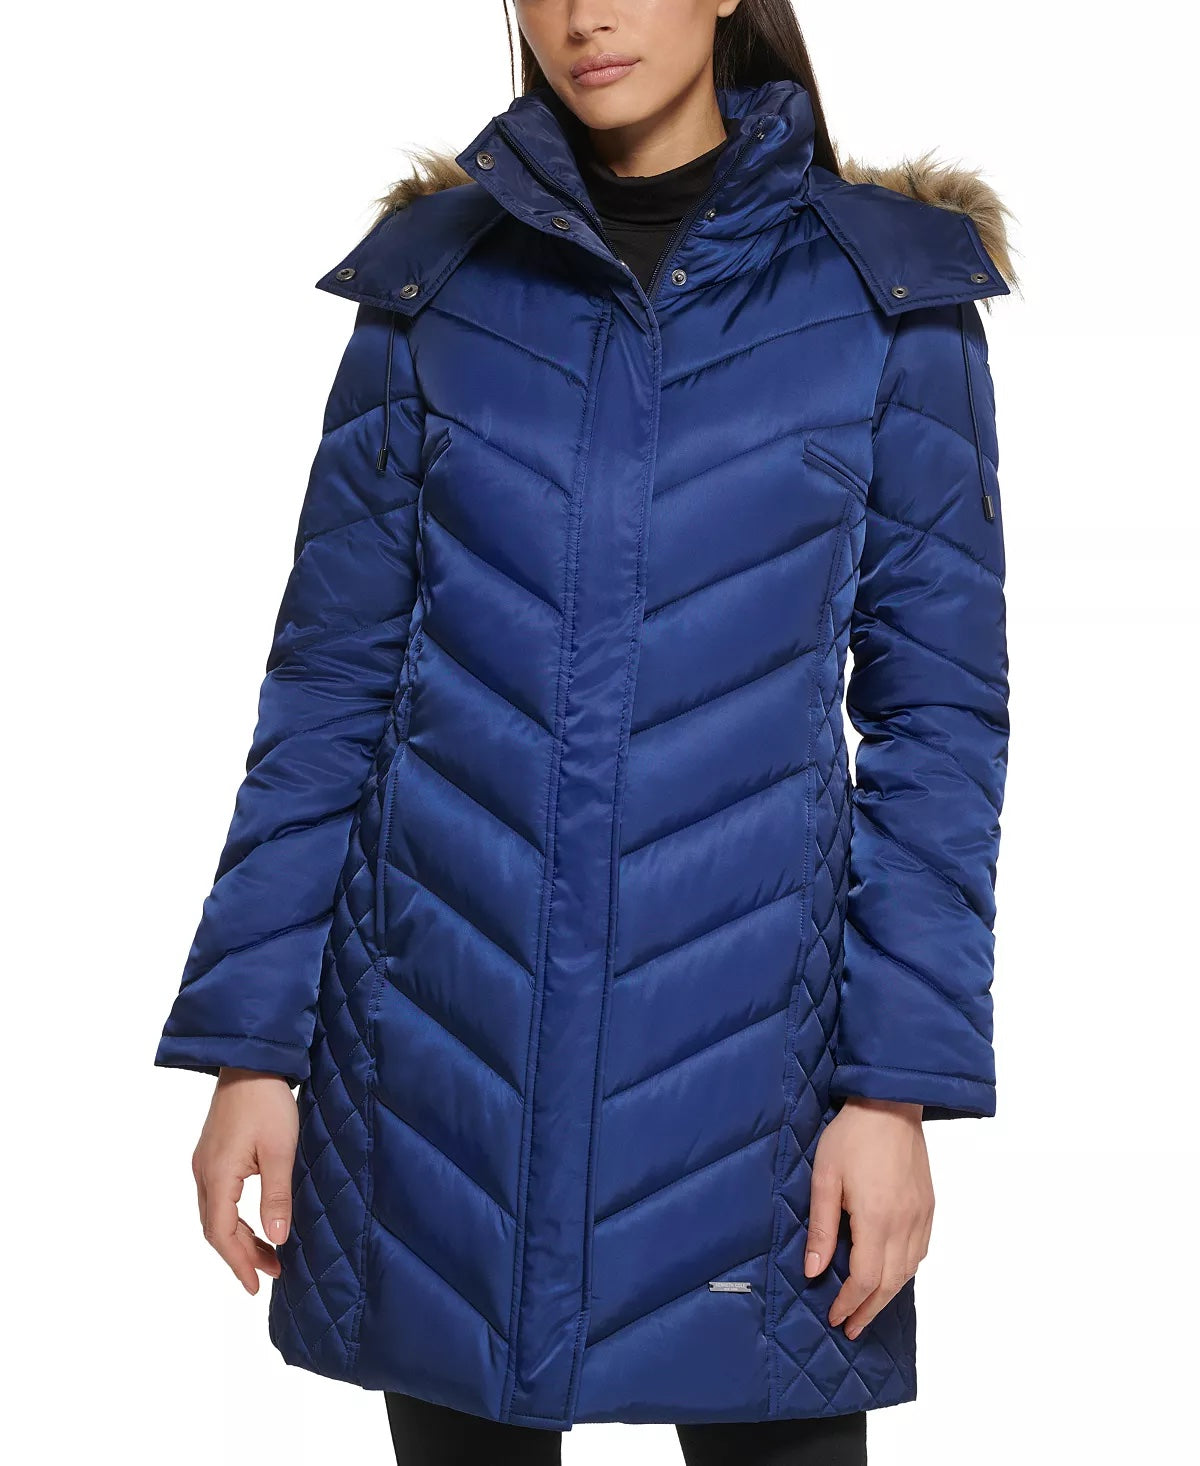 Kenneth Cole Women's Faux-Fur-Trim Hooded Puffer Coat Navy Blue Small